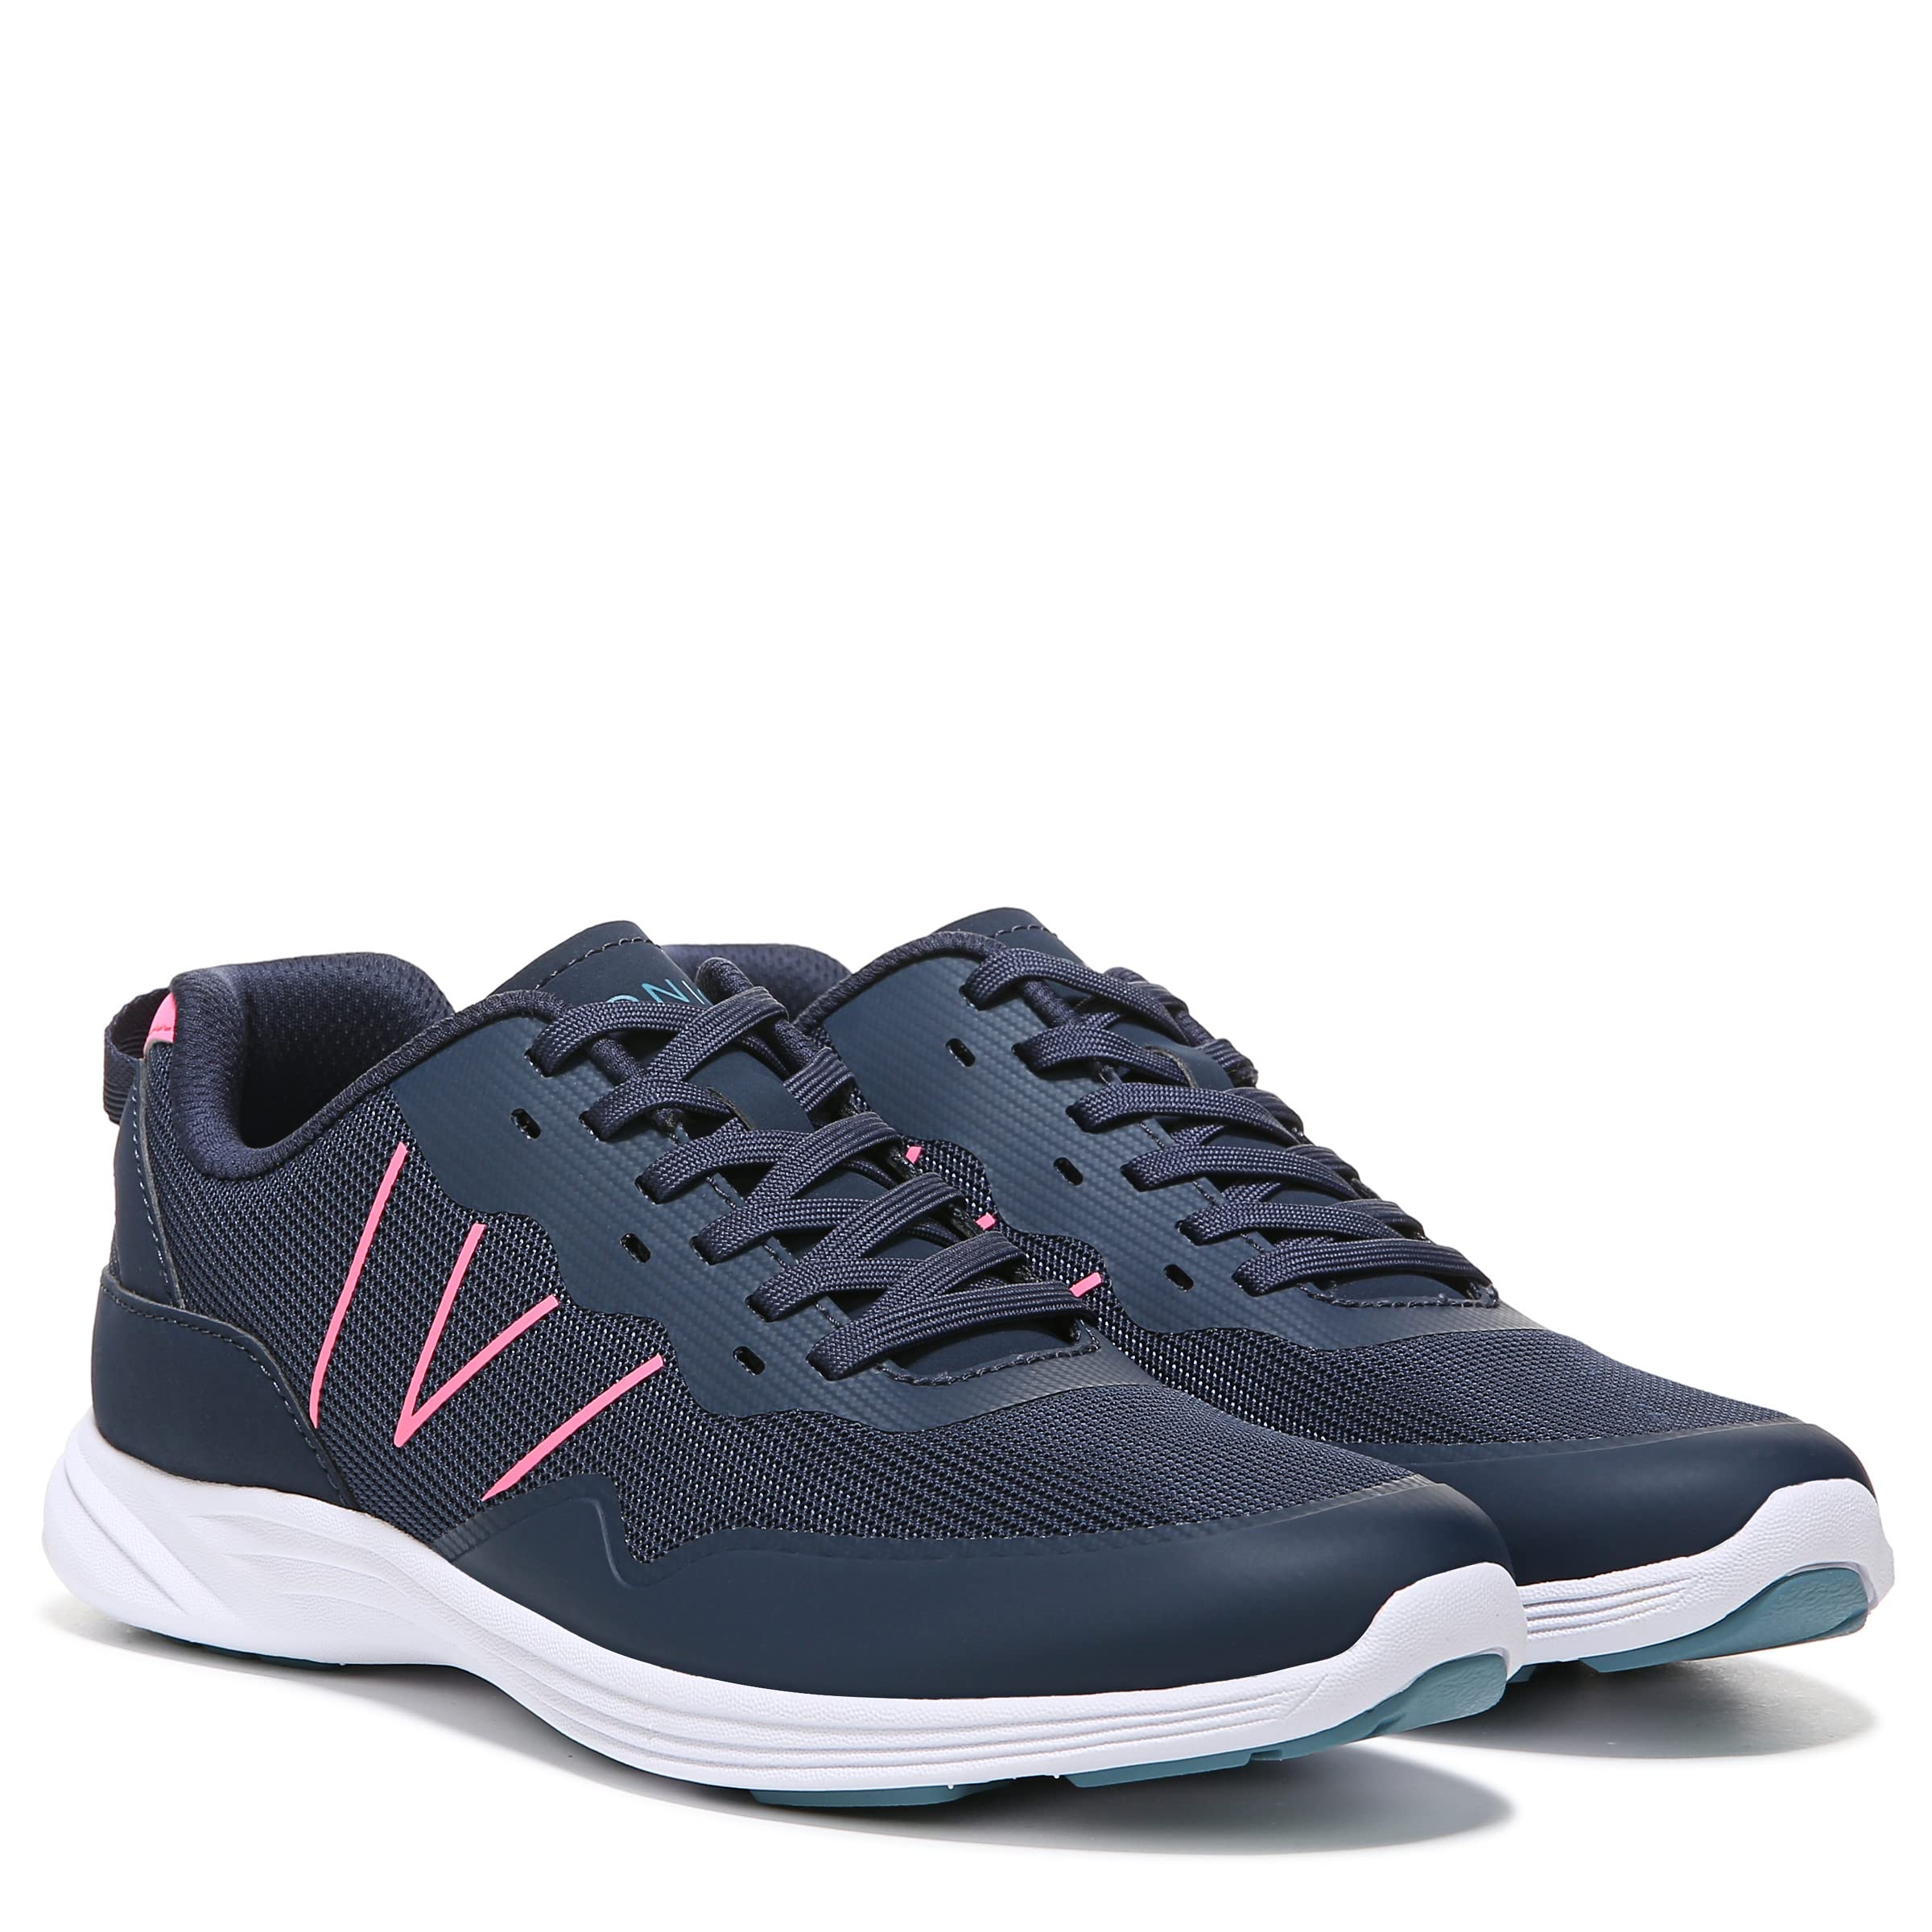 Vionic Women's Agile Audie Walking Sneakers-Supportive Lace-Up Sneakers That Include Three-Zone Comfort with Orthotic Insole Arch Support, Medium and Wide Fit, Navy 8 Medium